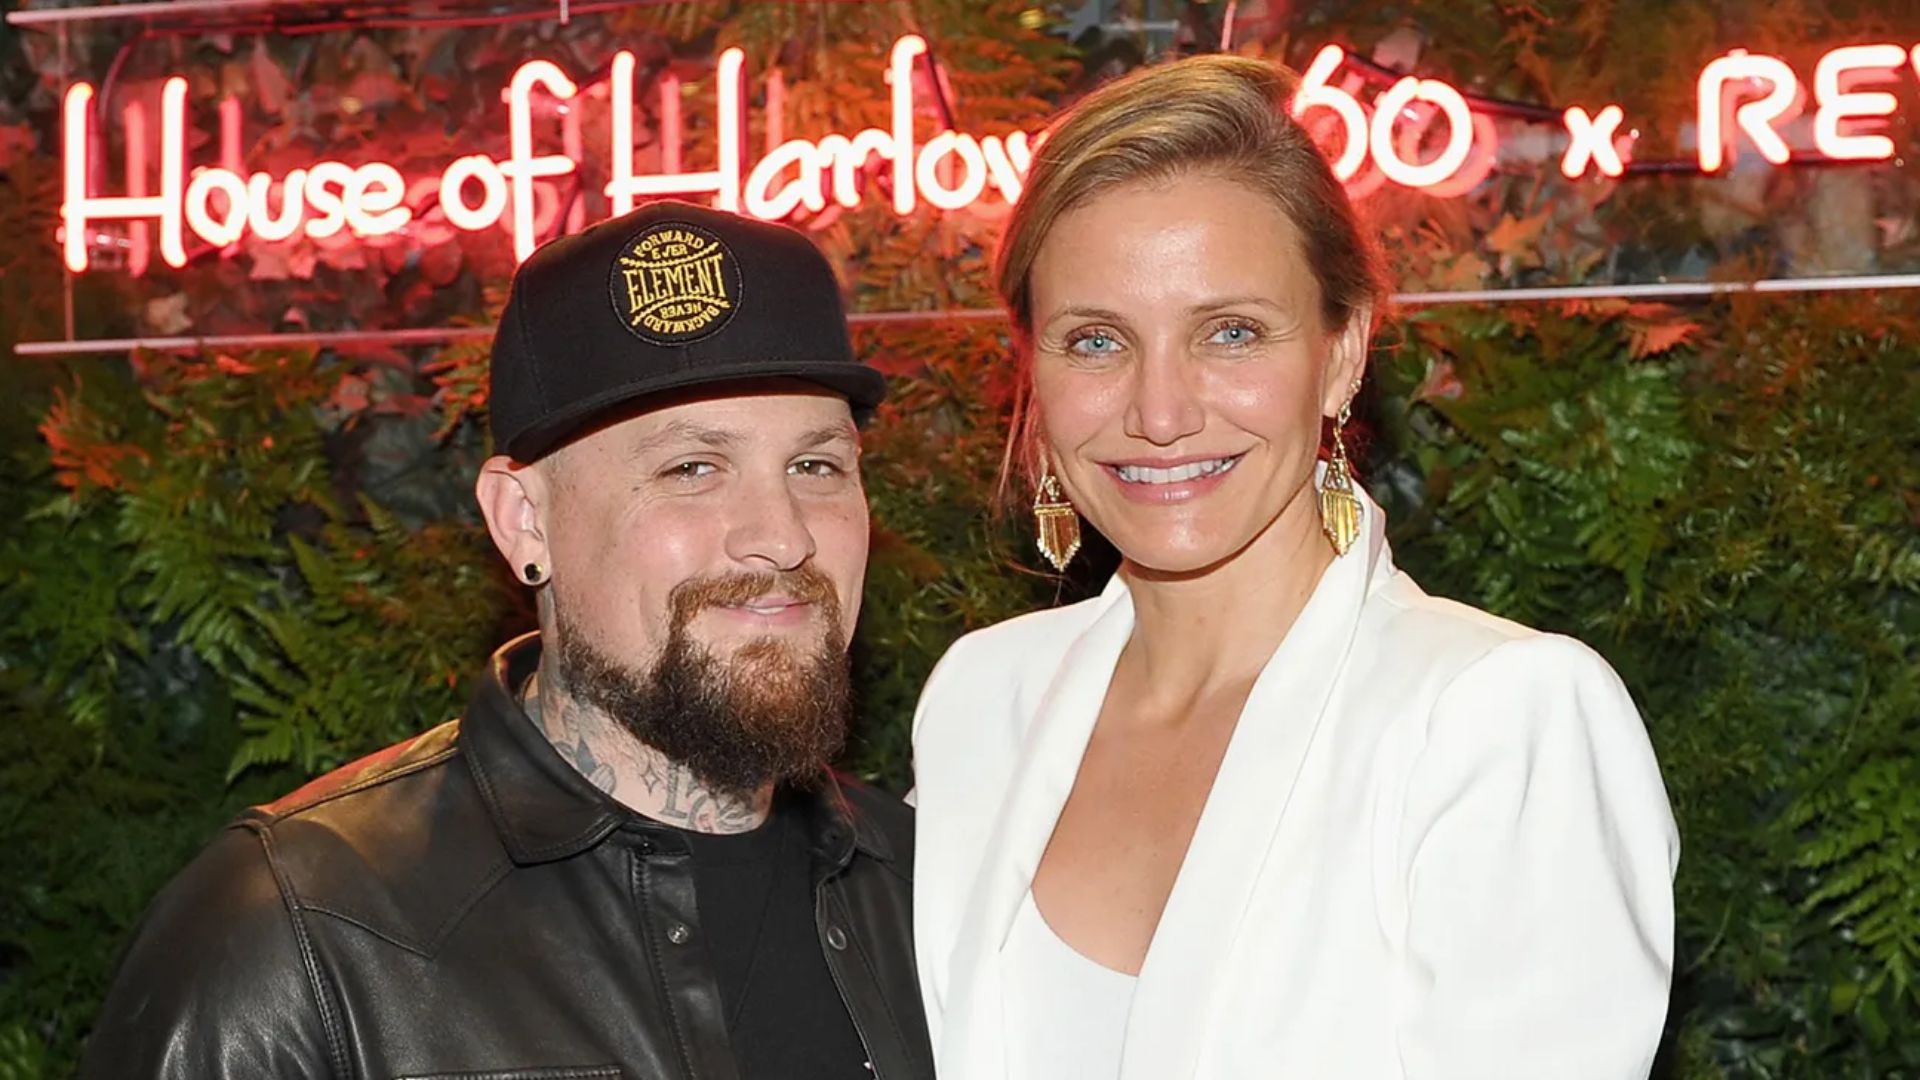 Cameron Diaz and Benji Madden welcomes a son